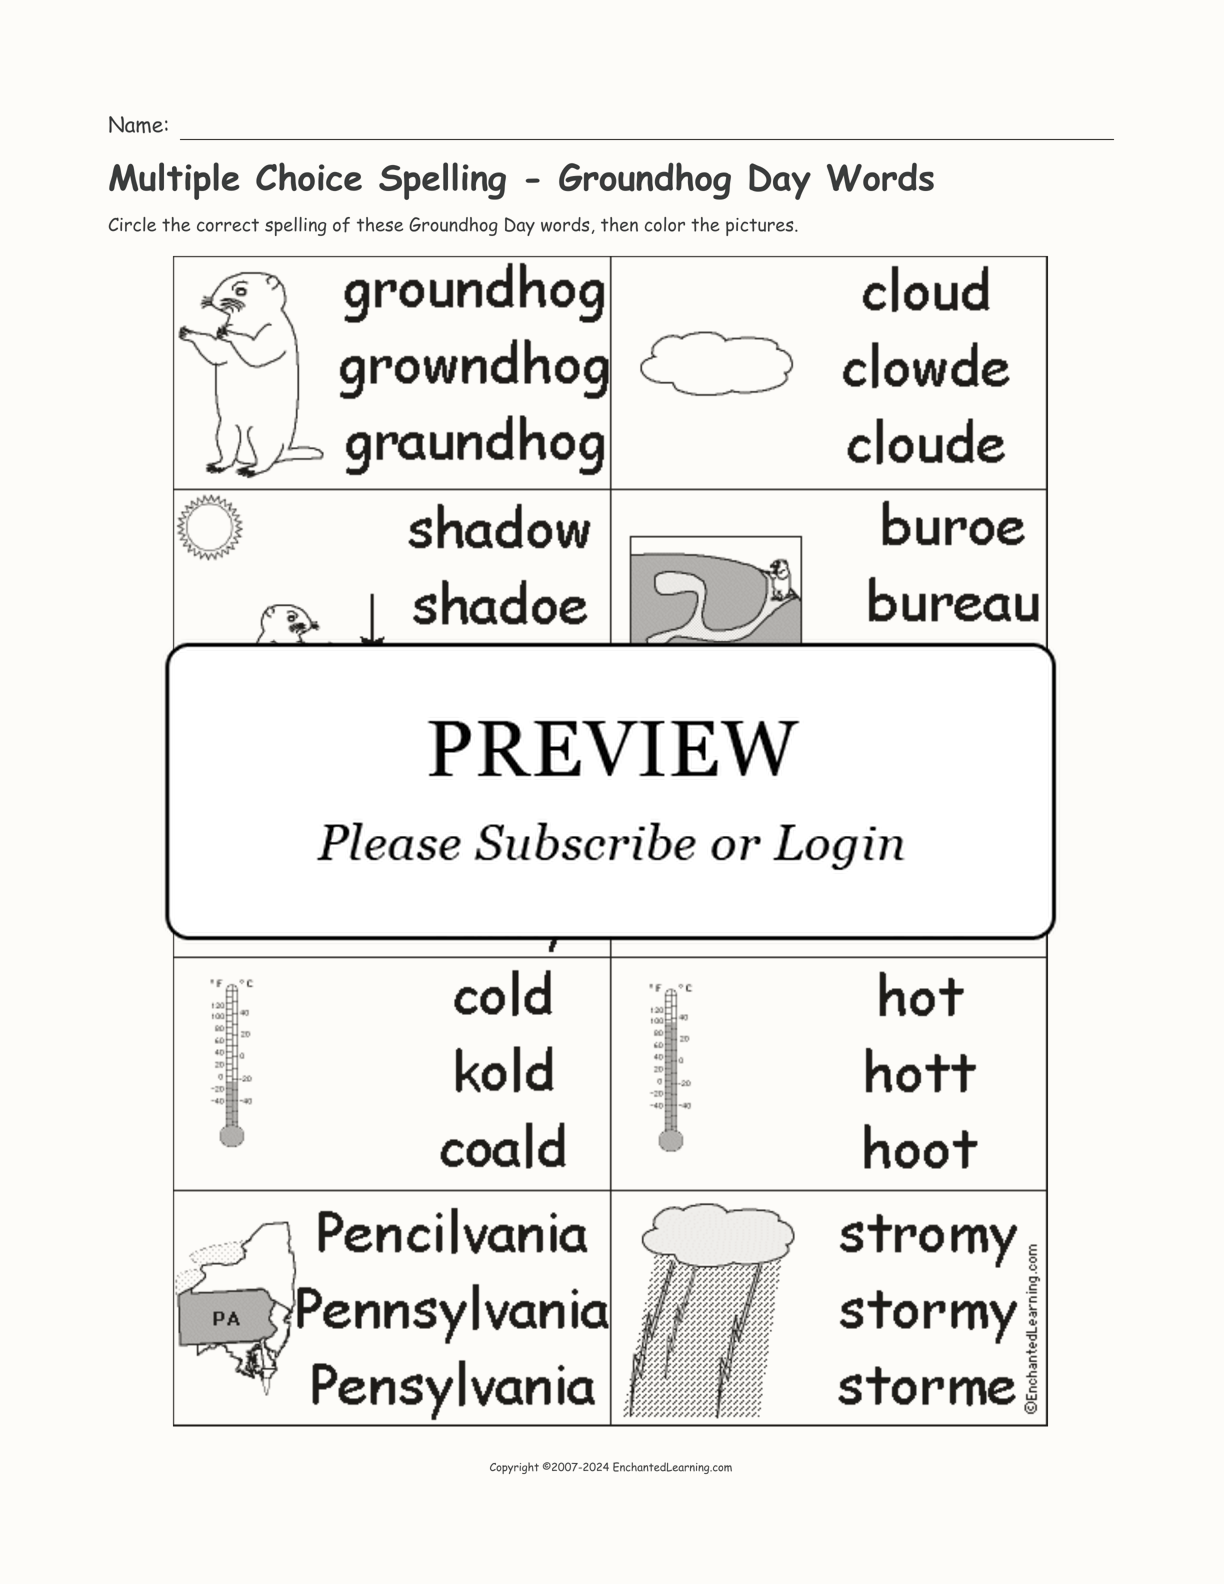 matching-alphabets-with-pictures-free-worksheets-kamberlawgroup